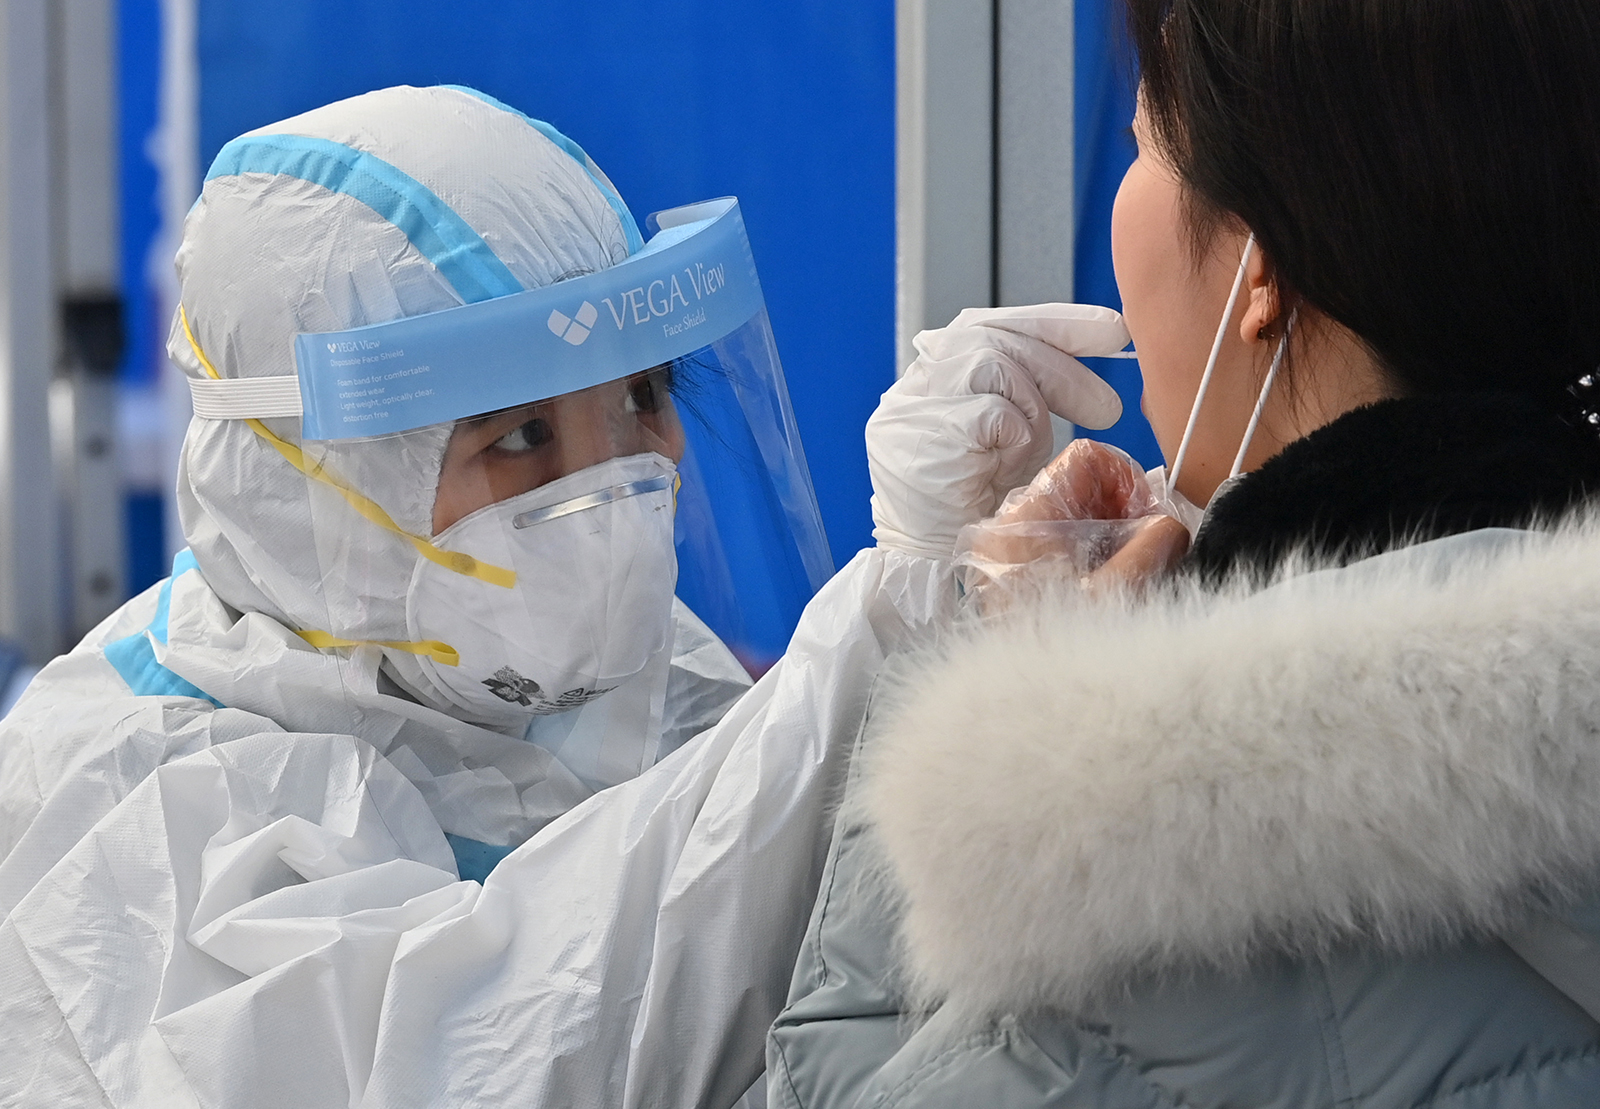 A medical worker takes samples from a visitor at a coronavirus testing station in Seoul, South Korea, on November 27.